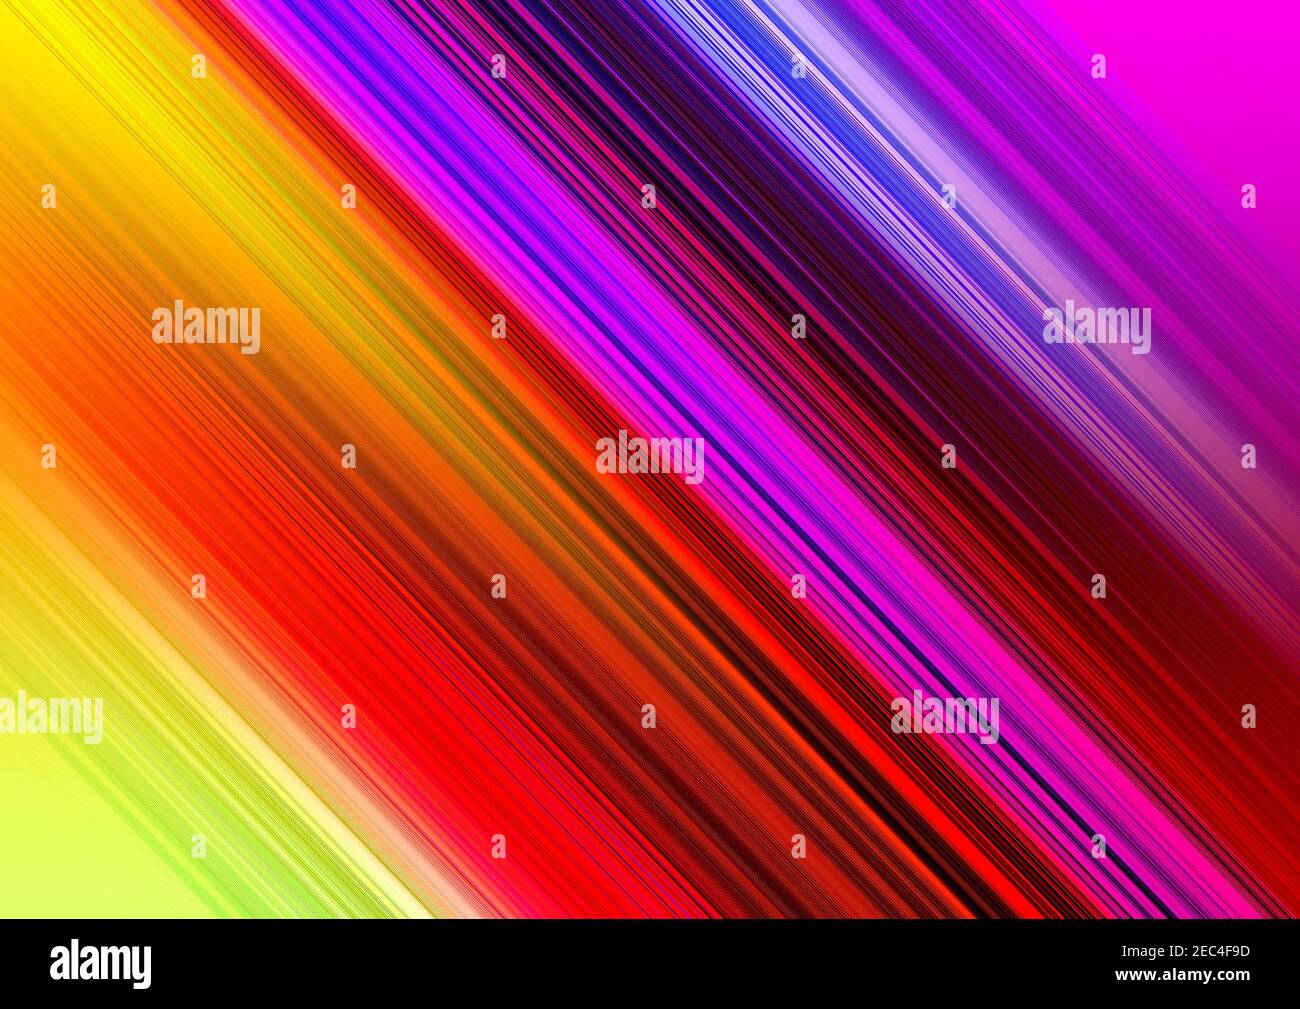 yellow orange red purple blue motion blur abstract background Stock Photo